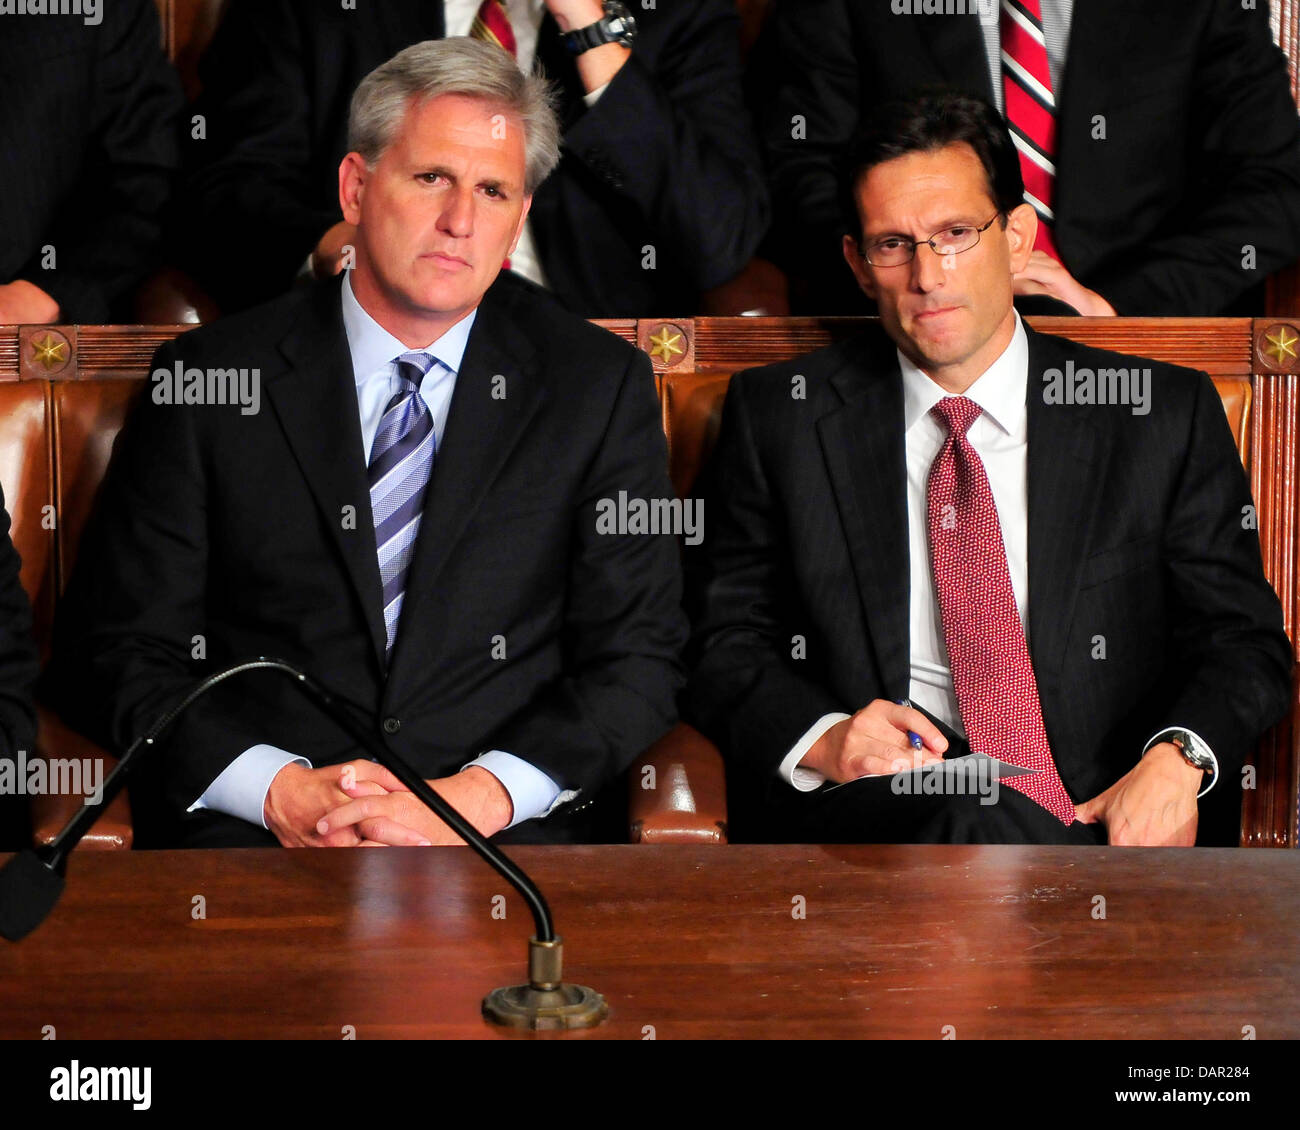 United States House Majority Whip Kevin McCarthy (Republican of California), left, and U.S. House Majority Leader Eric Cantor (Republican of Virginia), right, listen as President Barack Obama delivers an address on jobs andthe economy to a Joint Session of Congress at the Capitol in Washington, D.C. on Thursday, September 8, 2011..Credit: Ron Sachs / CNP.(RESTRICTION: NO New York o Stock Photo